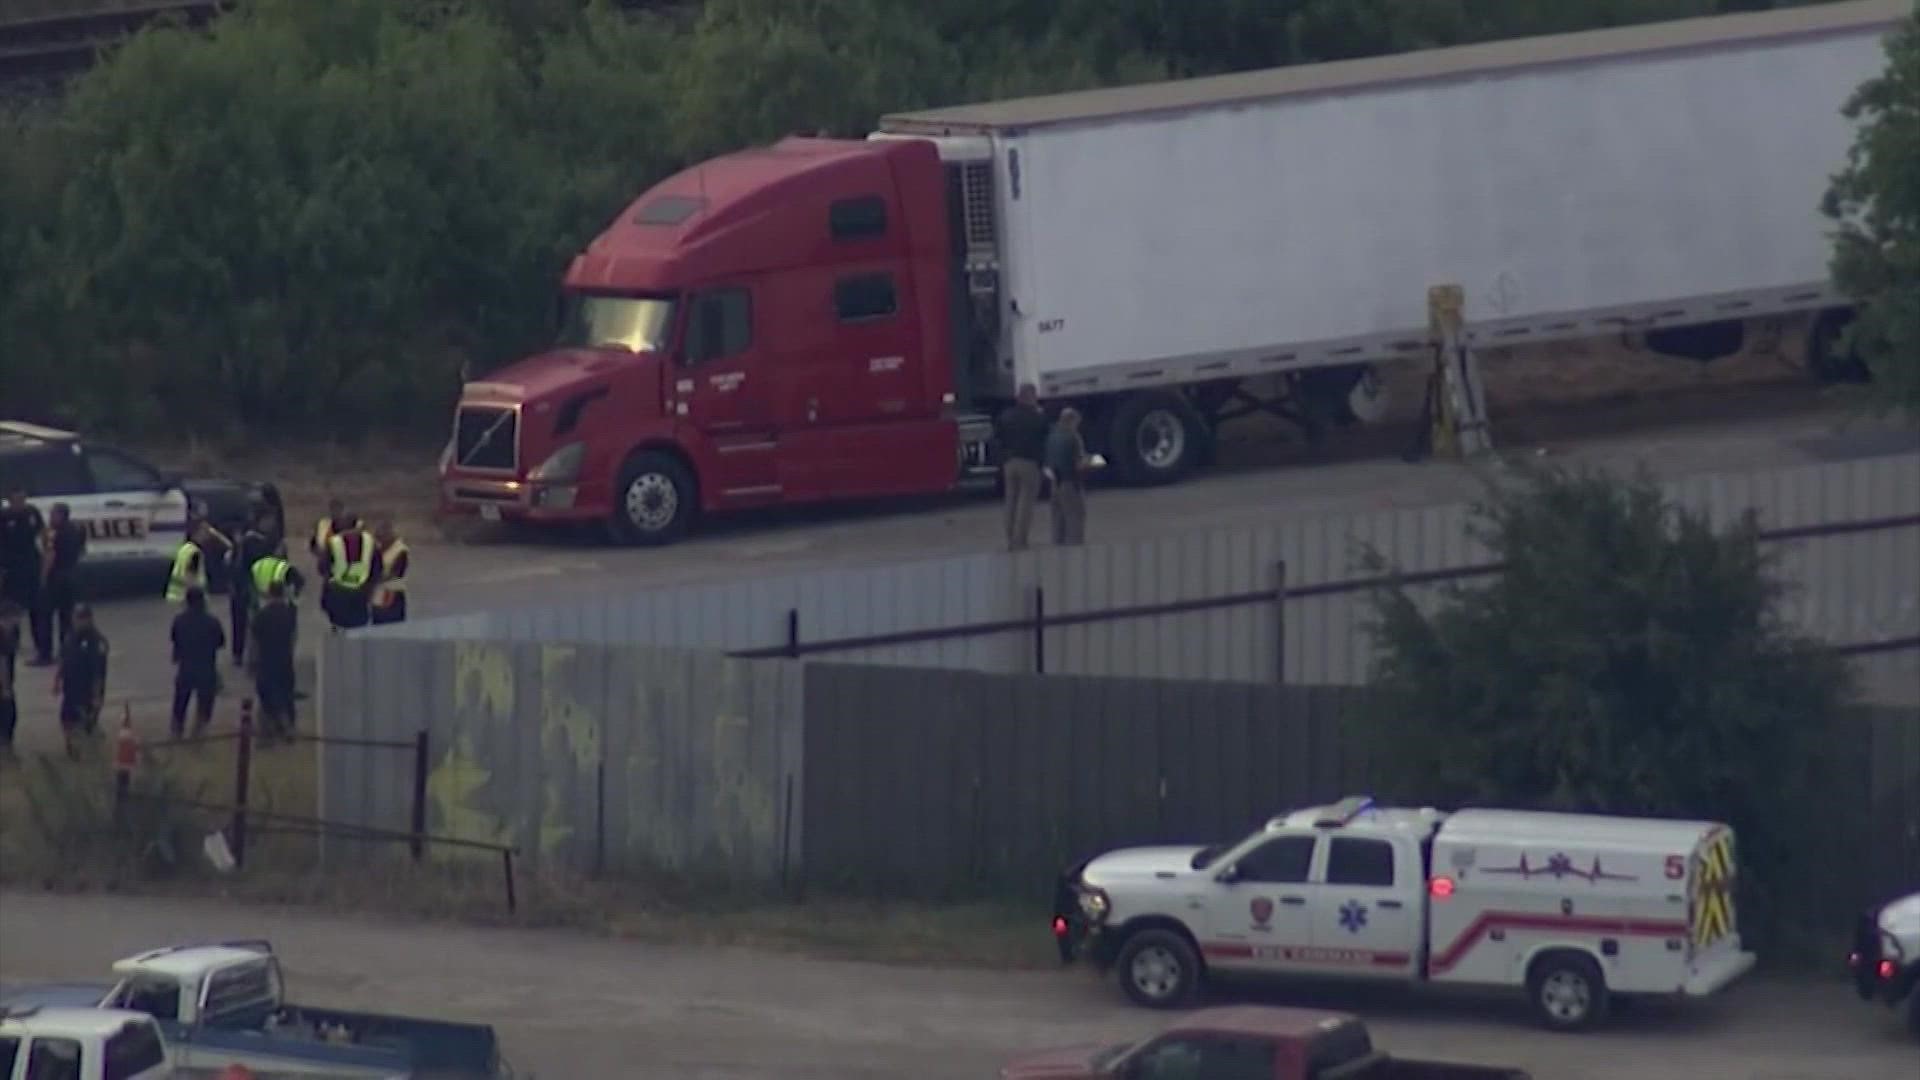 Four men have been charged in connection with the smuggling attempt of dozens of migrants who were found dead inside a tractor-trailer in San Antonio.